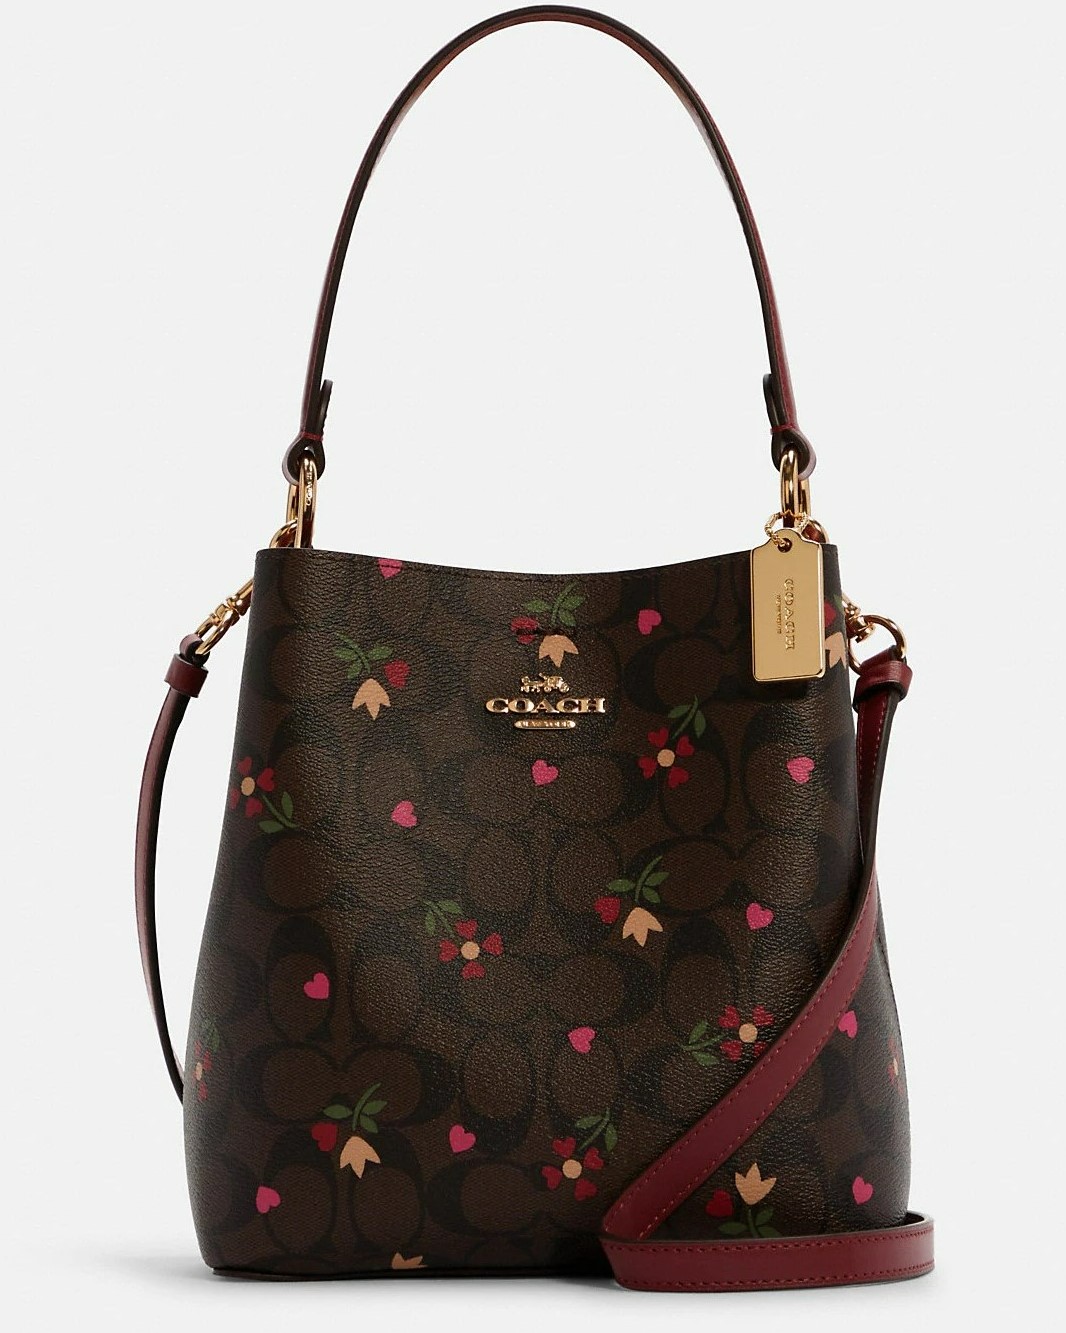 TÚI XÁCH NỮ COACH SMALL TOWN BUCKET BAG IN BROWN MULTI SIGNATURE CANVAS WITH HEART PETAL PRINT 6